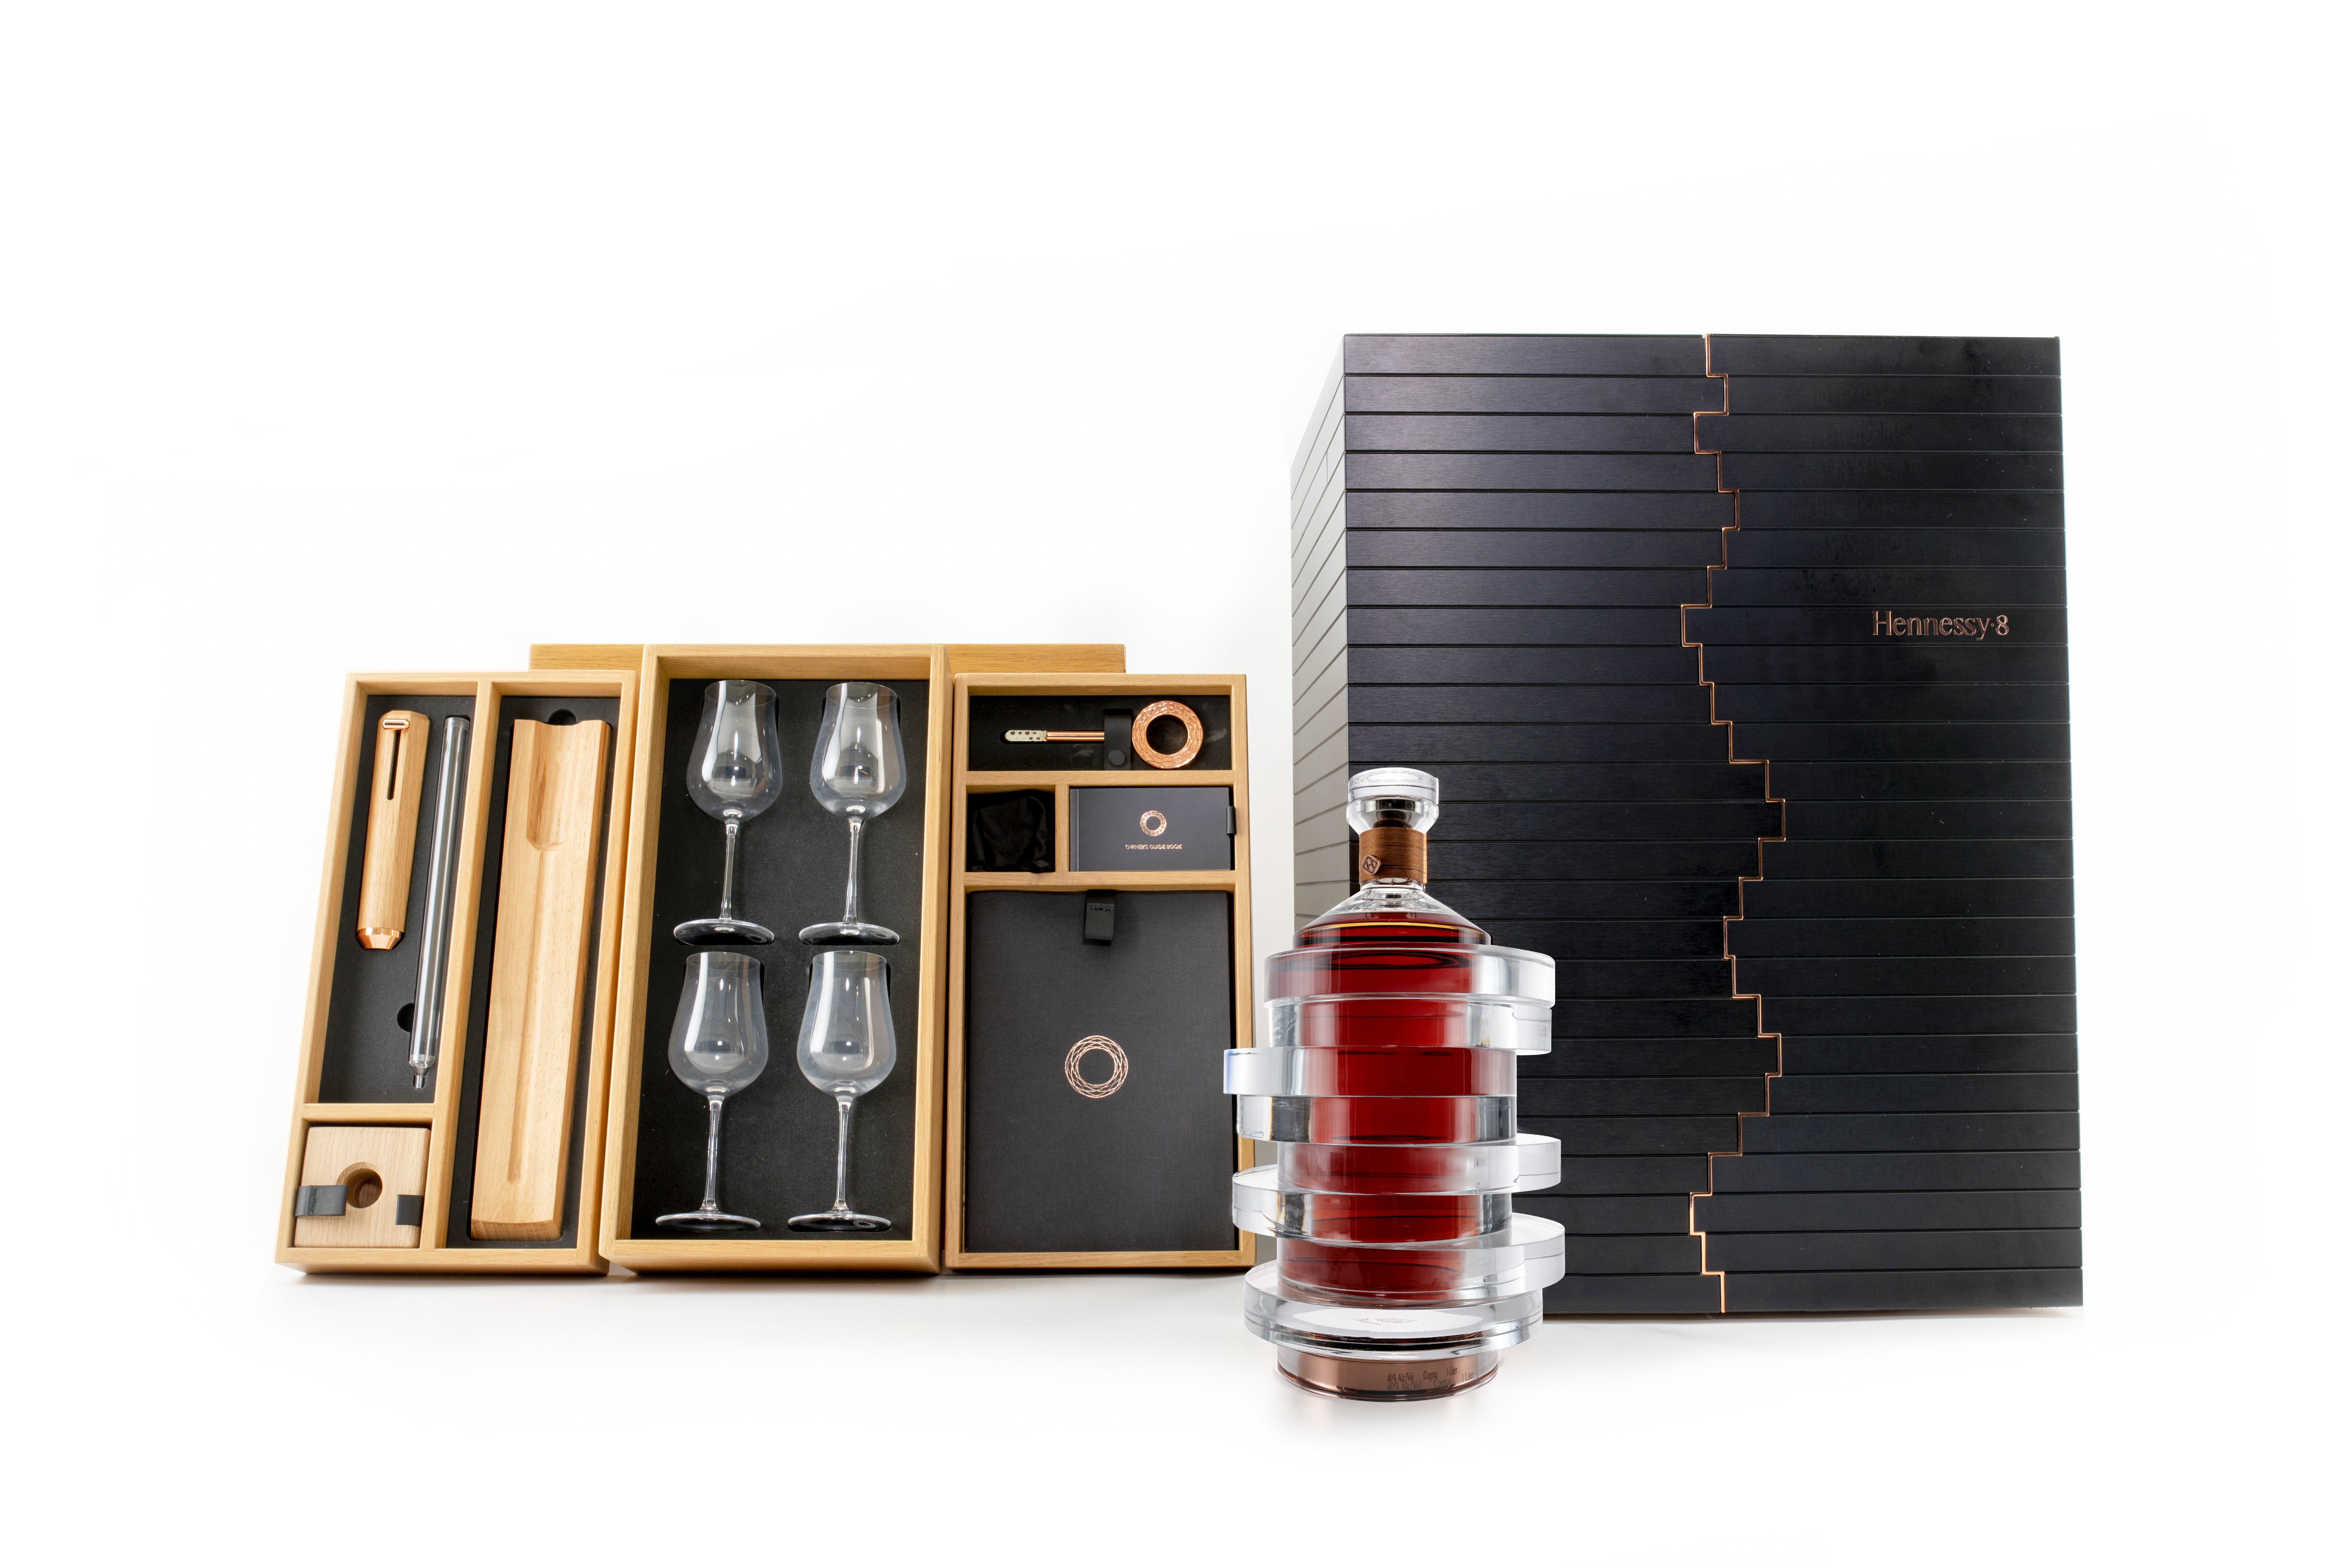 Louis Vuitton has partnered with Hennessey for a $273,000 trunk and crystal  decanter - Luxurylaunches